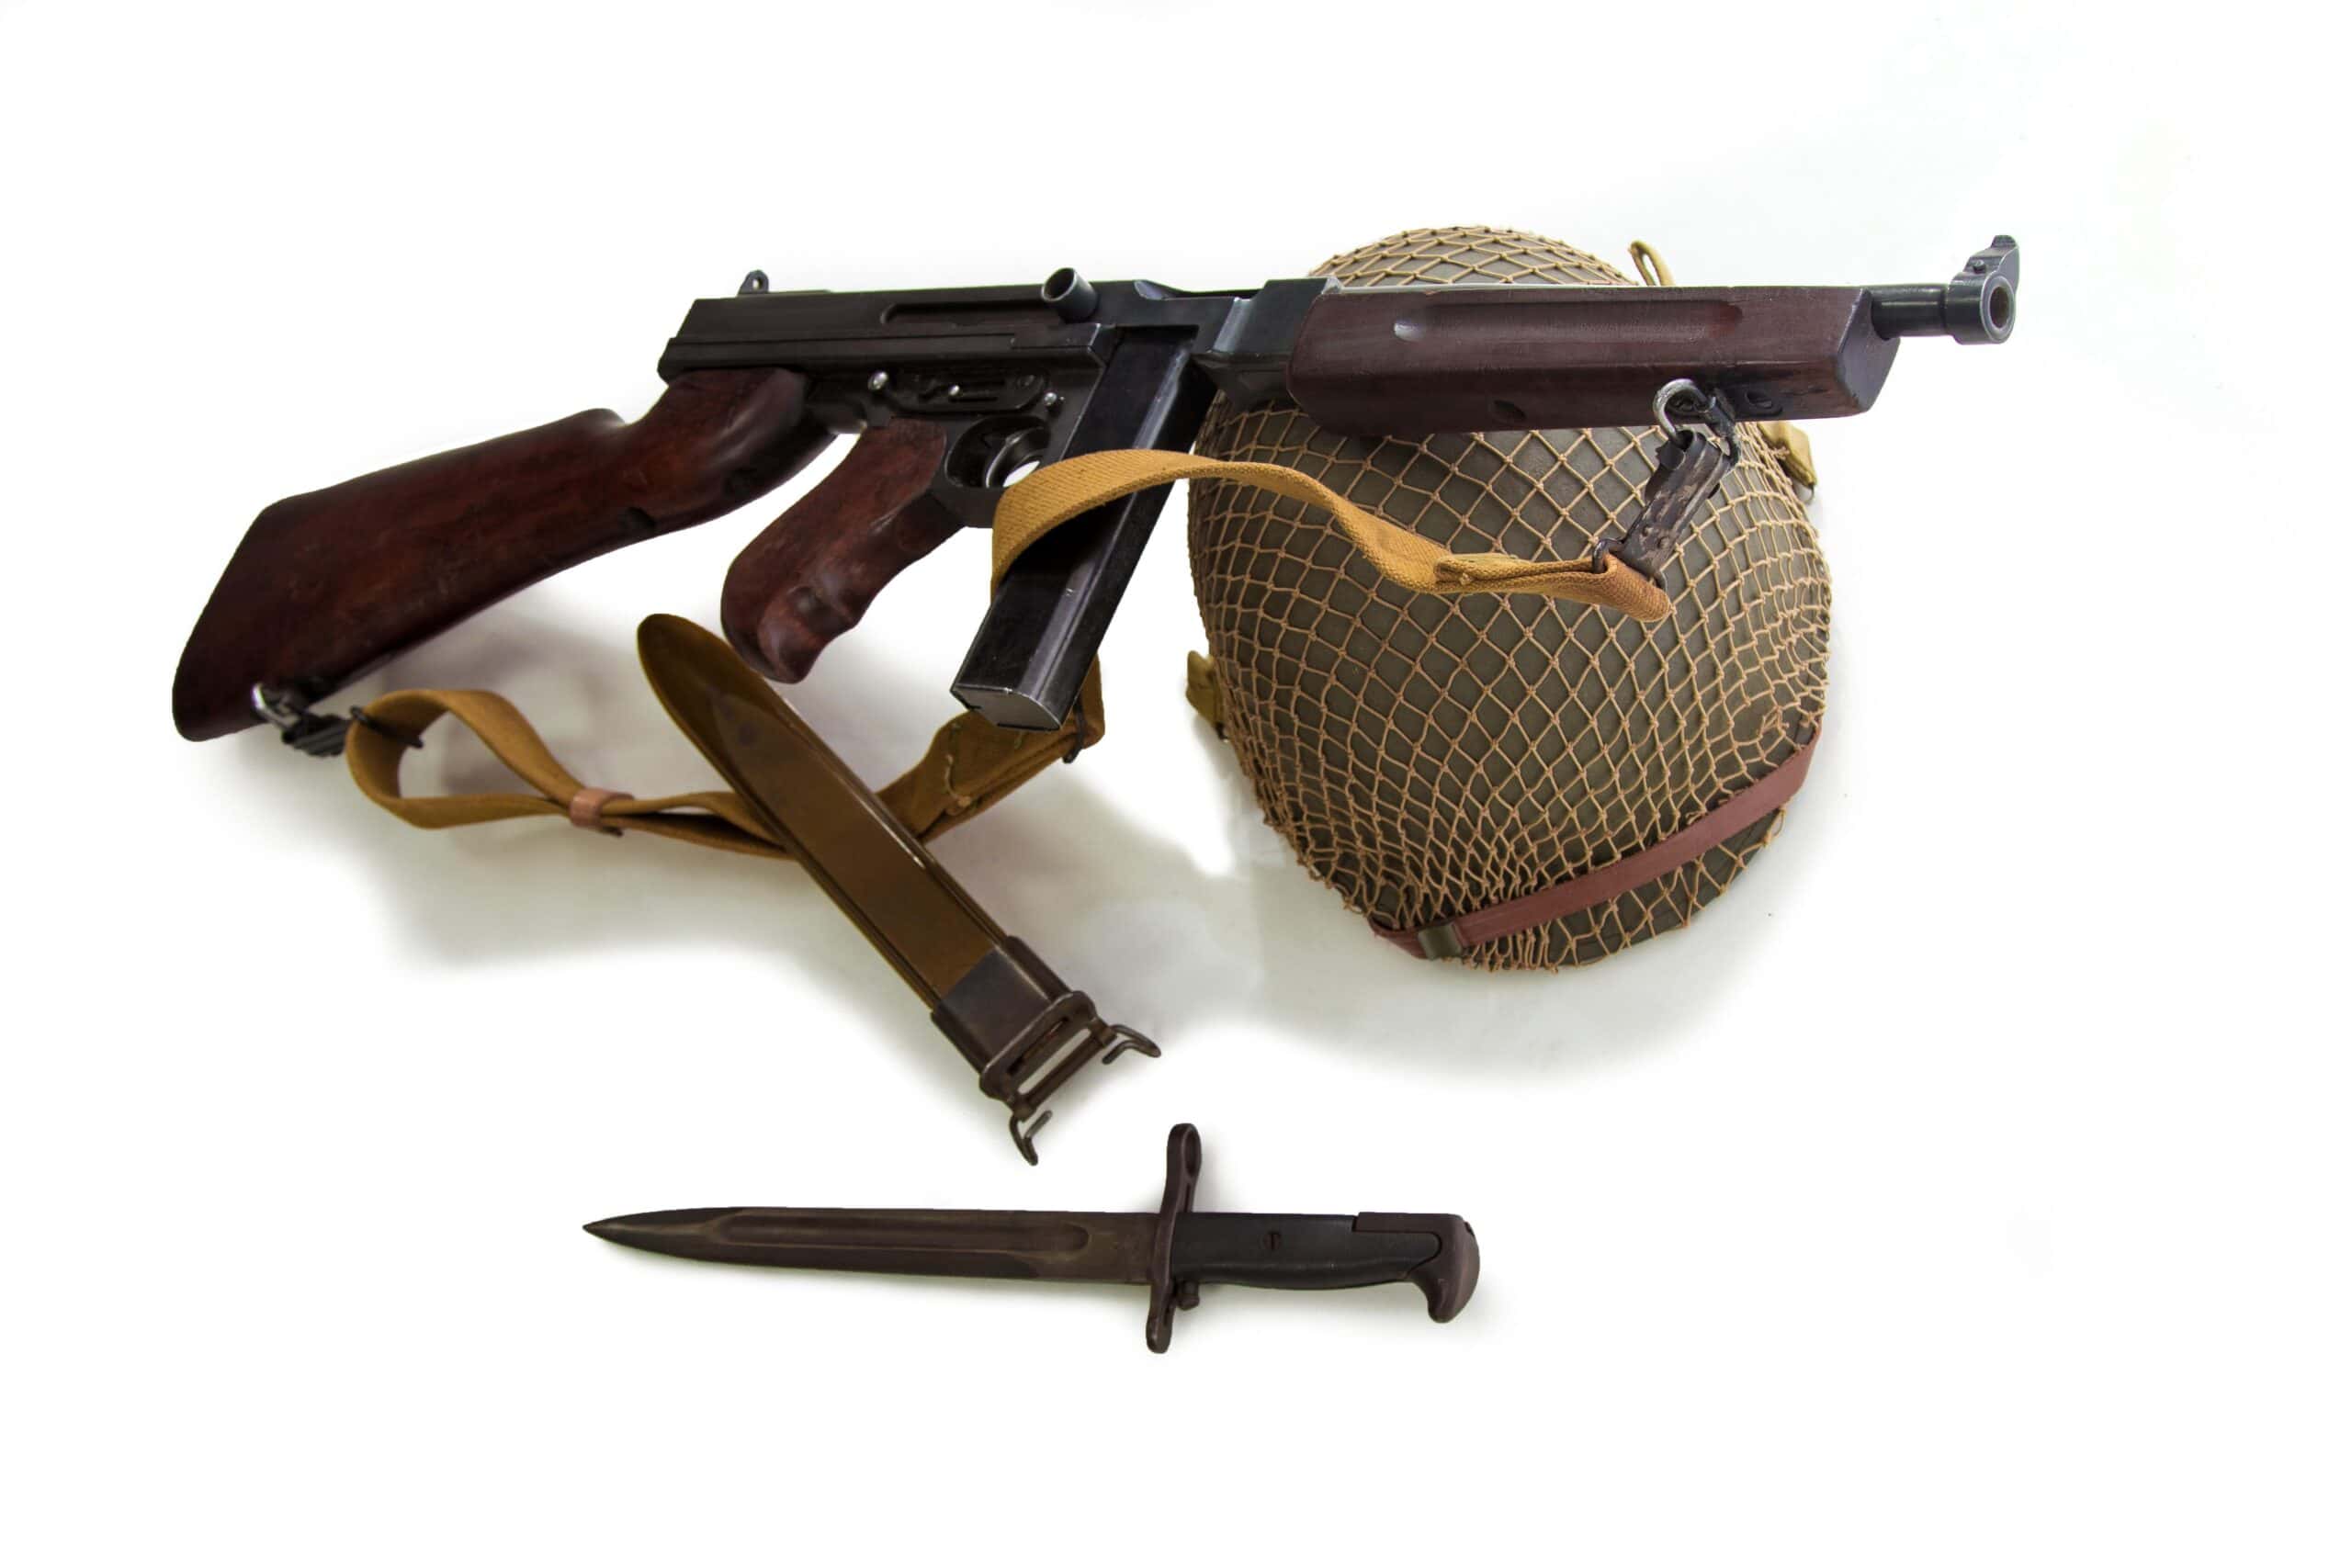 Marine Corps Colonel | Weapon of an American Marine, helmet, knife and submachine gun of the period of World War II over white background